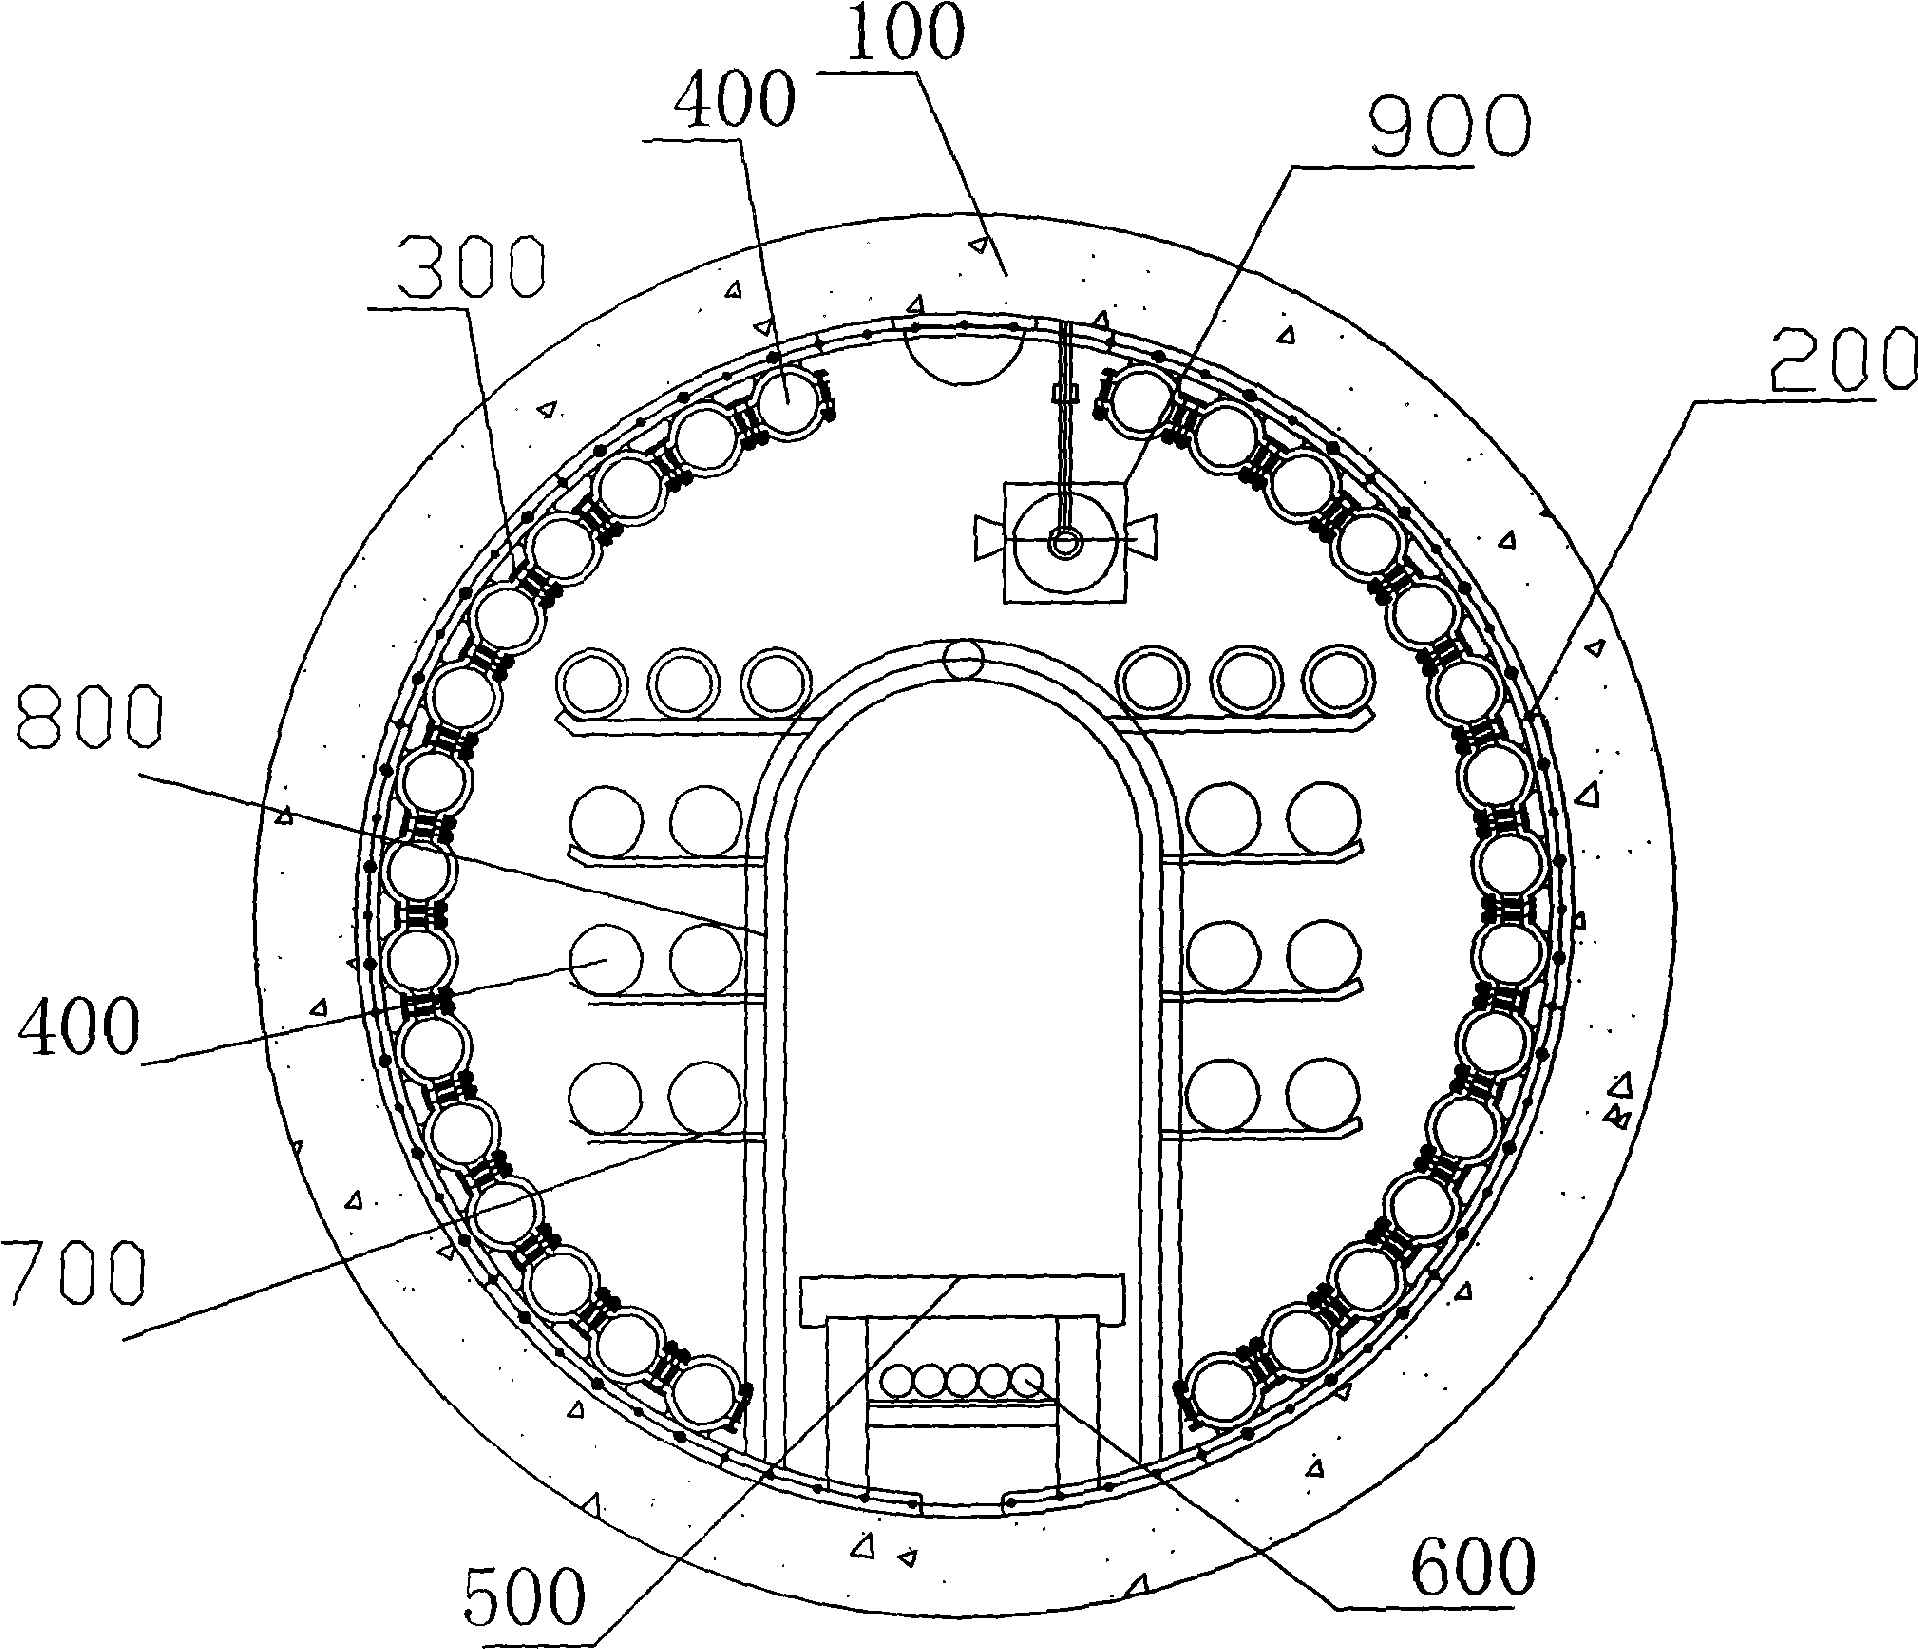 Tunnel ring-shaped deployment for electric cable with large cross-section